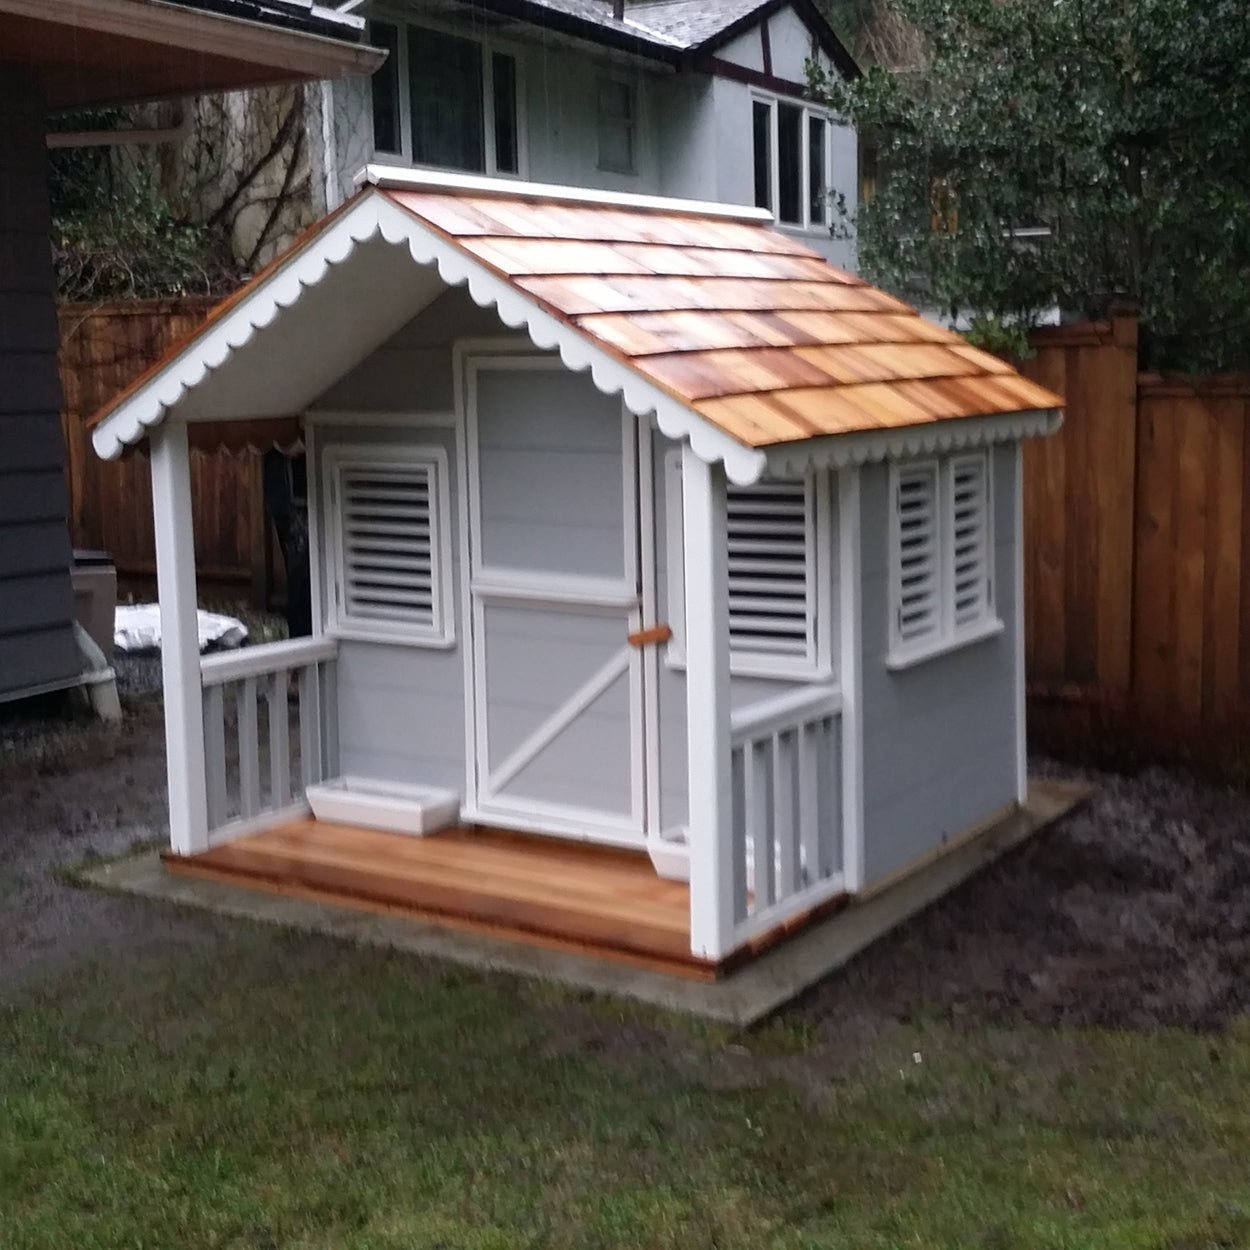 Little Alexandra Cottage with front porch (6ft x 6ft)